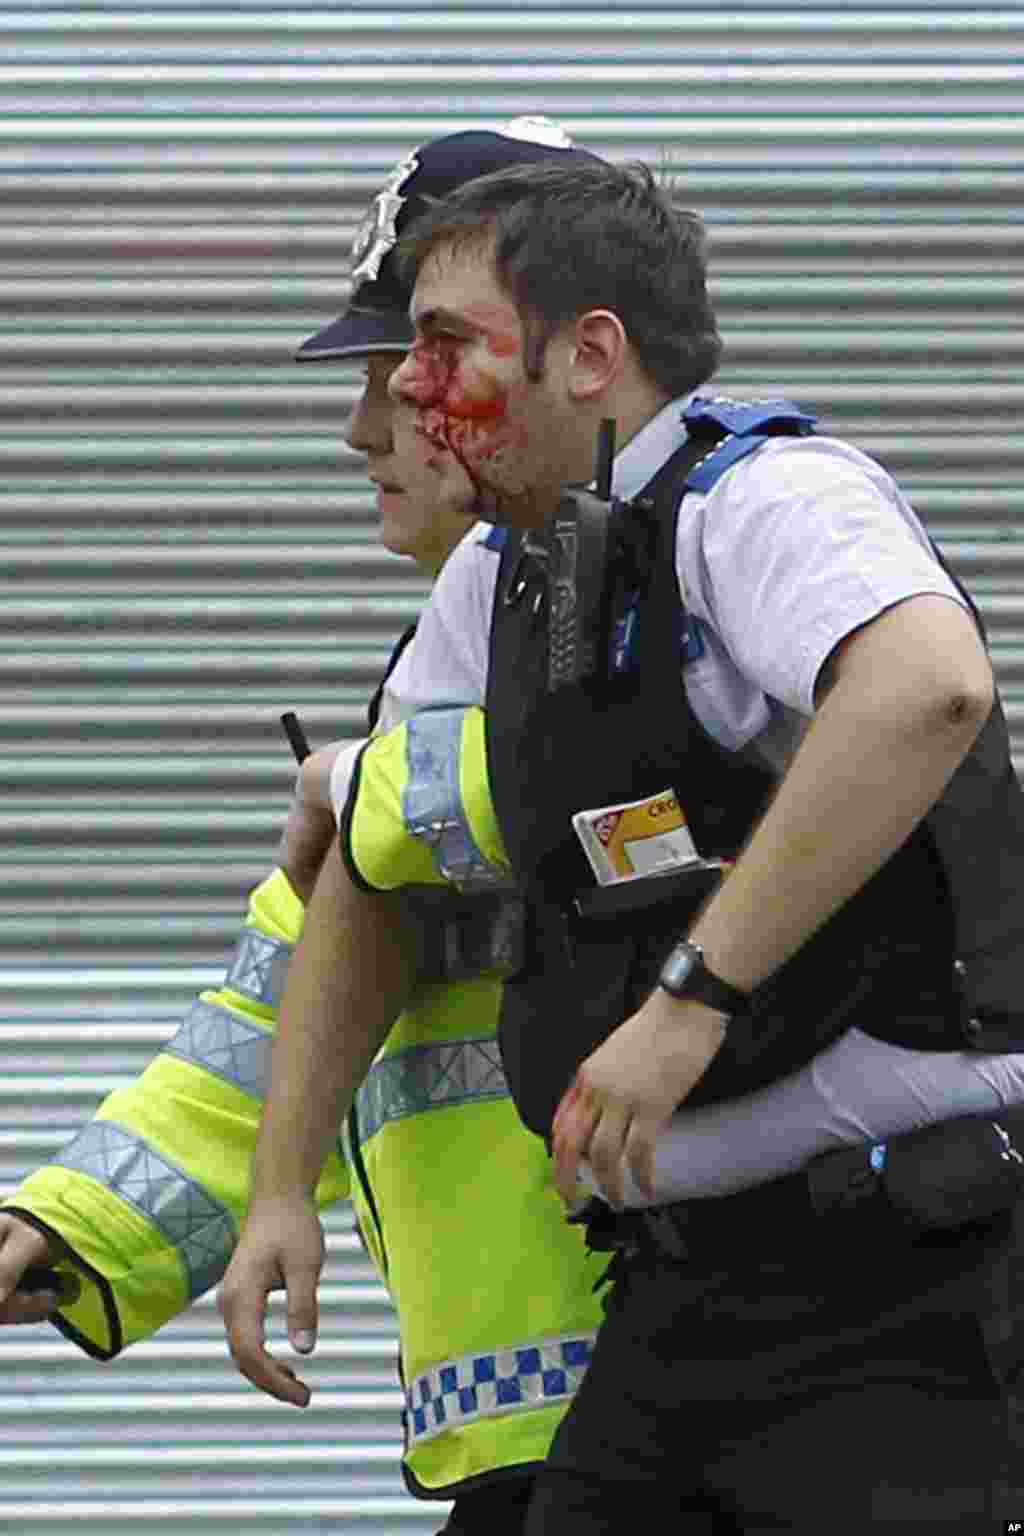 A police officer helps an injured officer as rioters gathered in Croydon, south London, Monday, Aug. 8, 2011. Violence and looting spread across some of London's most impoverished neighborhoods on Monday, with youths setting fire to shops and vehicles, du